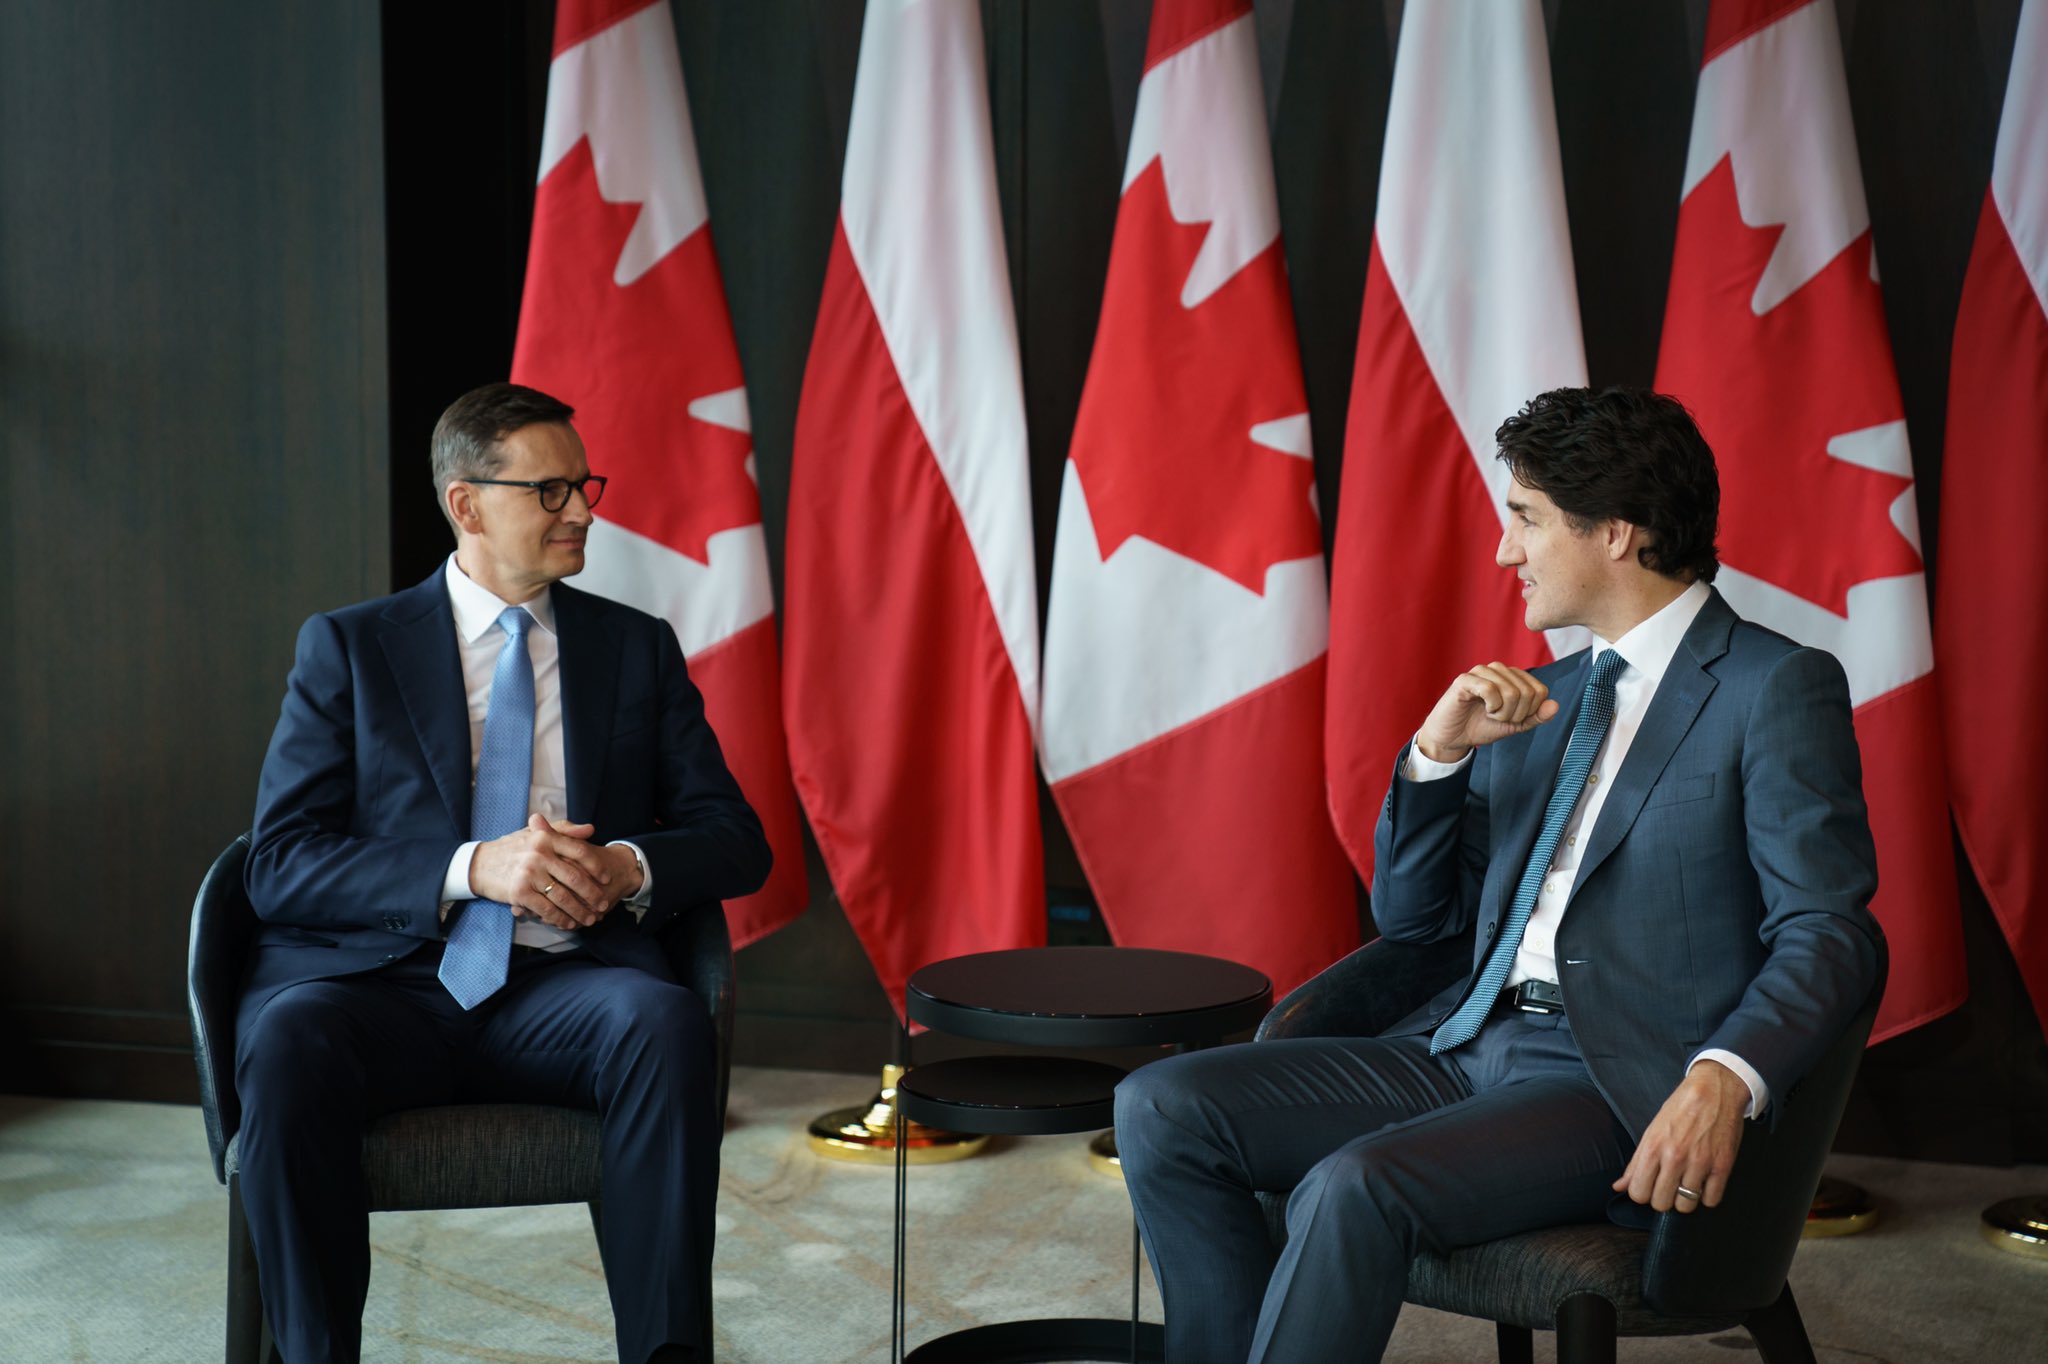 Poland Prime Minister meets his counterpart in Toronto, talks about joint corporation